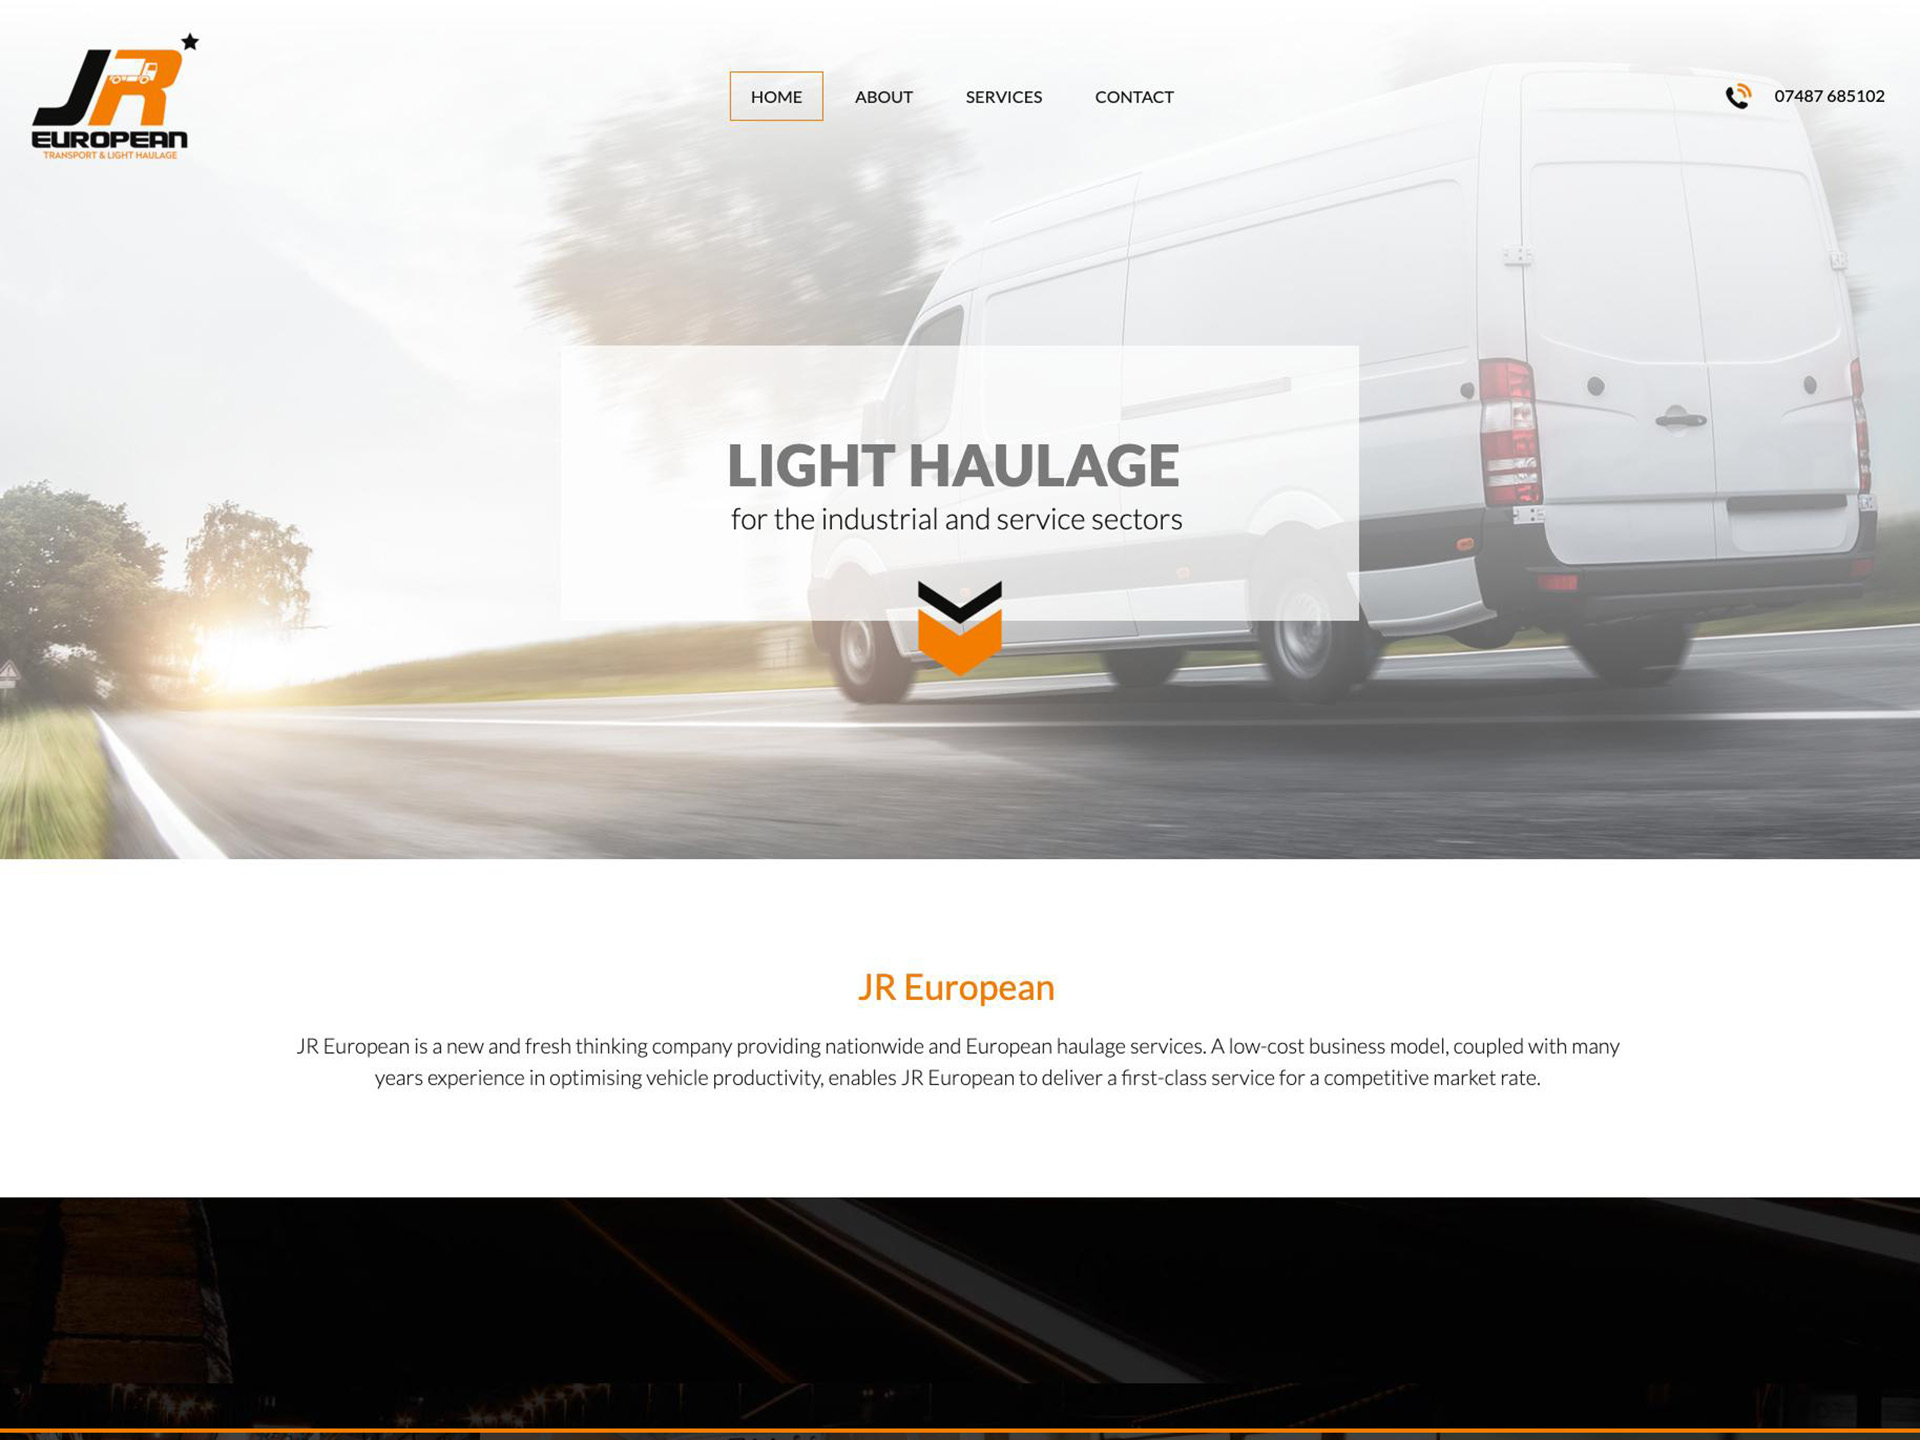 A website for haulage company